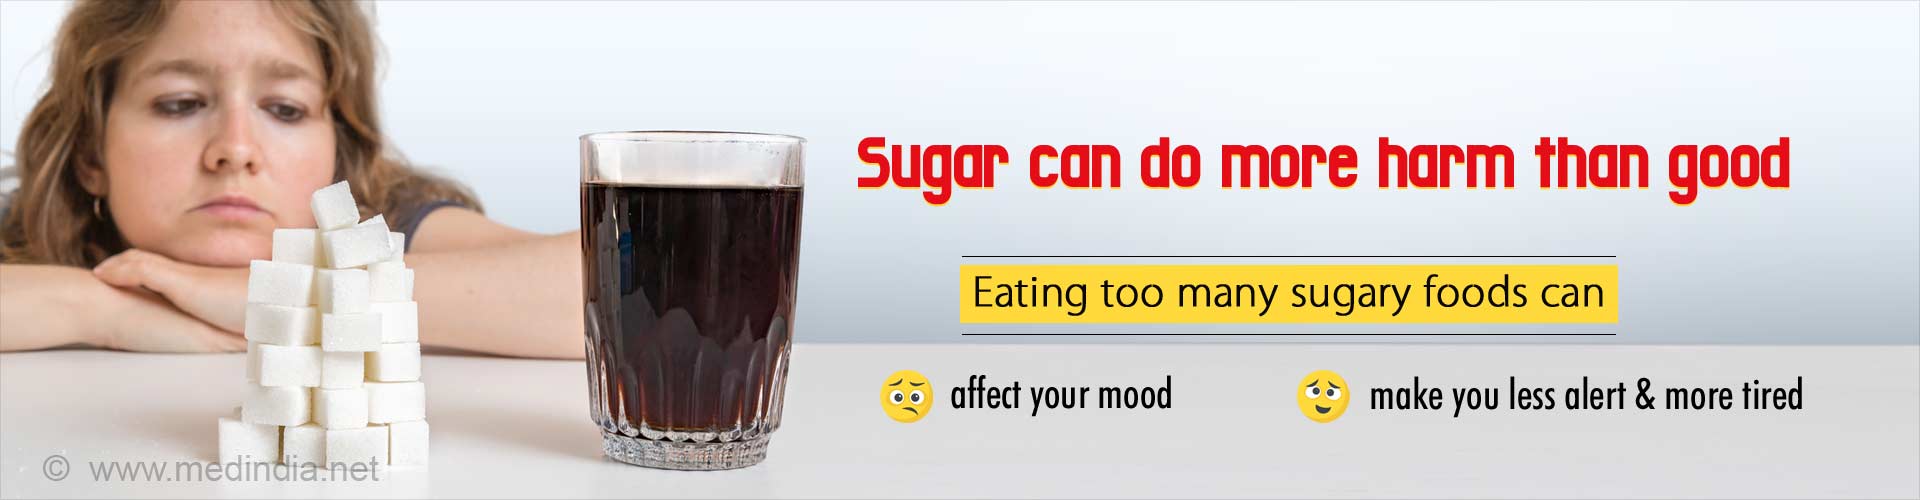 Sugar can do more harm than good. Eating too many sugary foods can affect your mood and make you less alert and more tired.